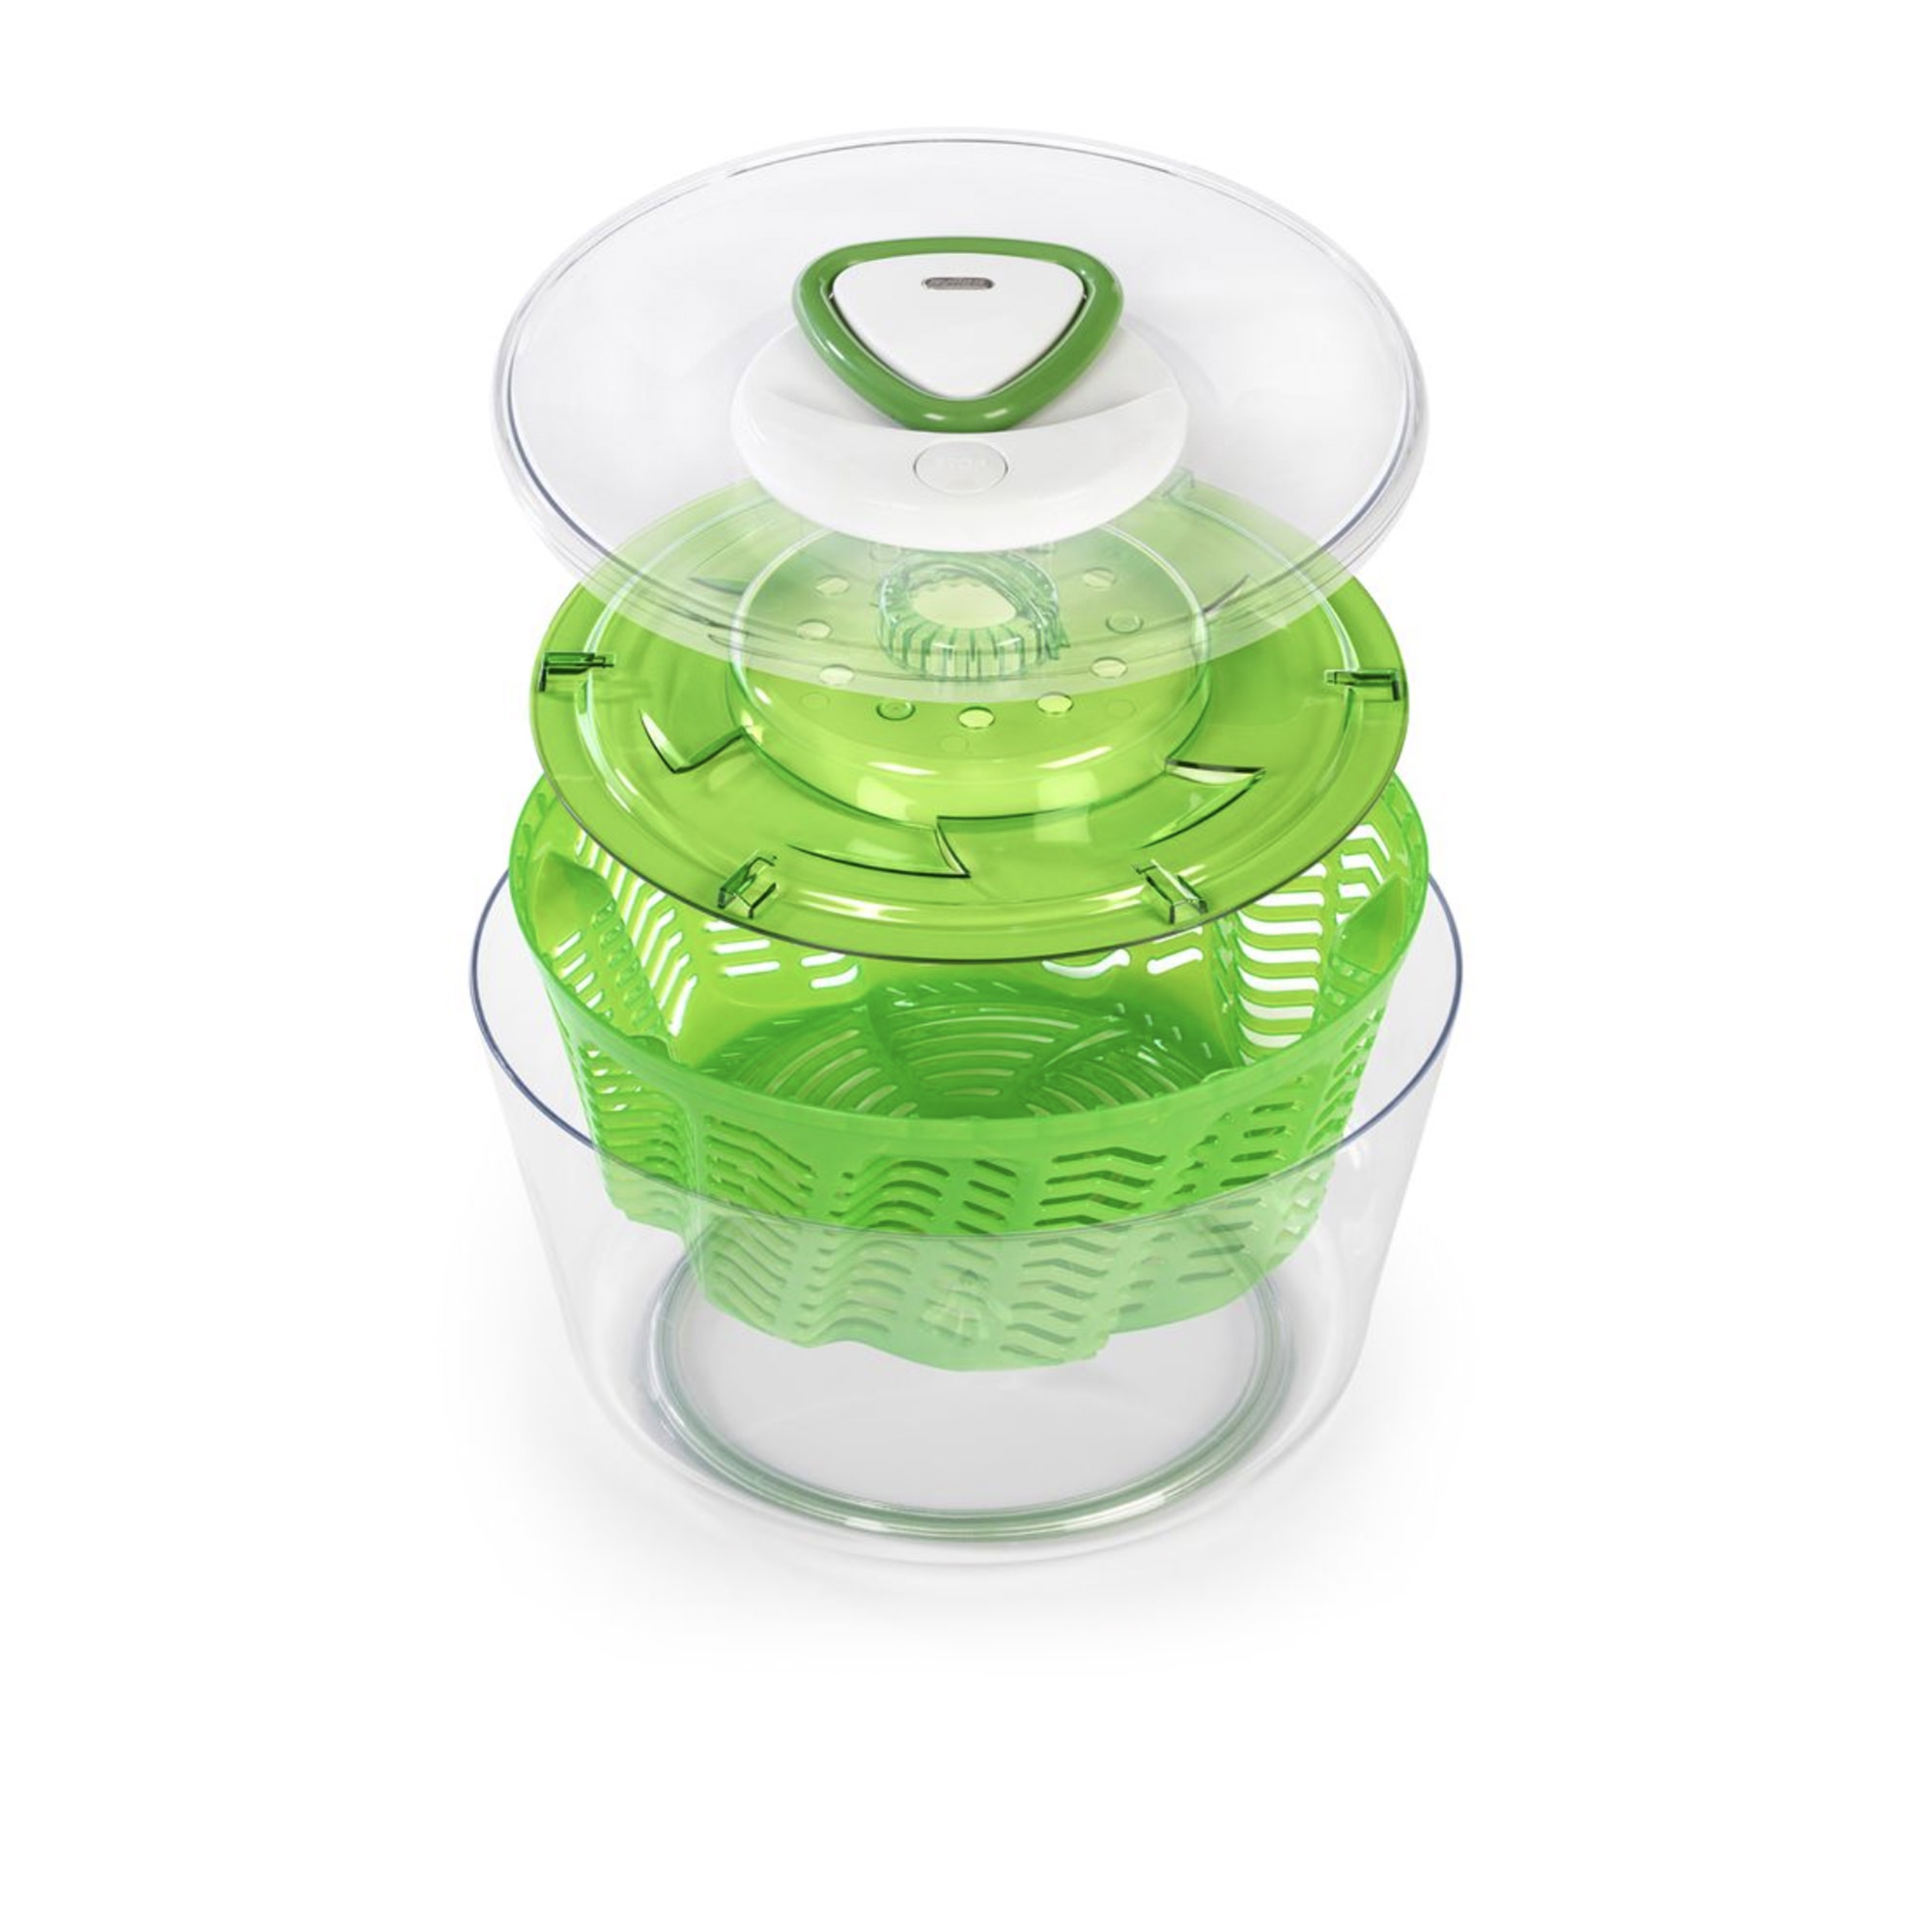 Zyliss Easy Spin 2 Salad Spinner Large Green Image 2